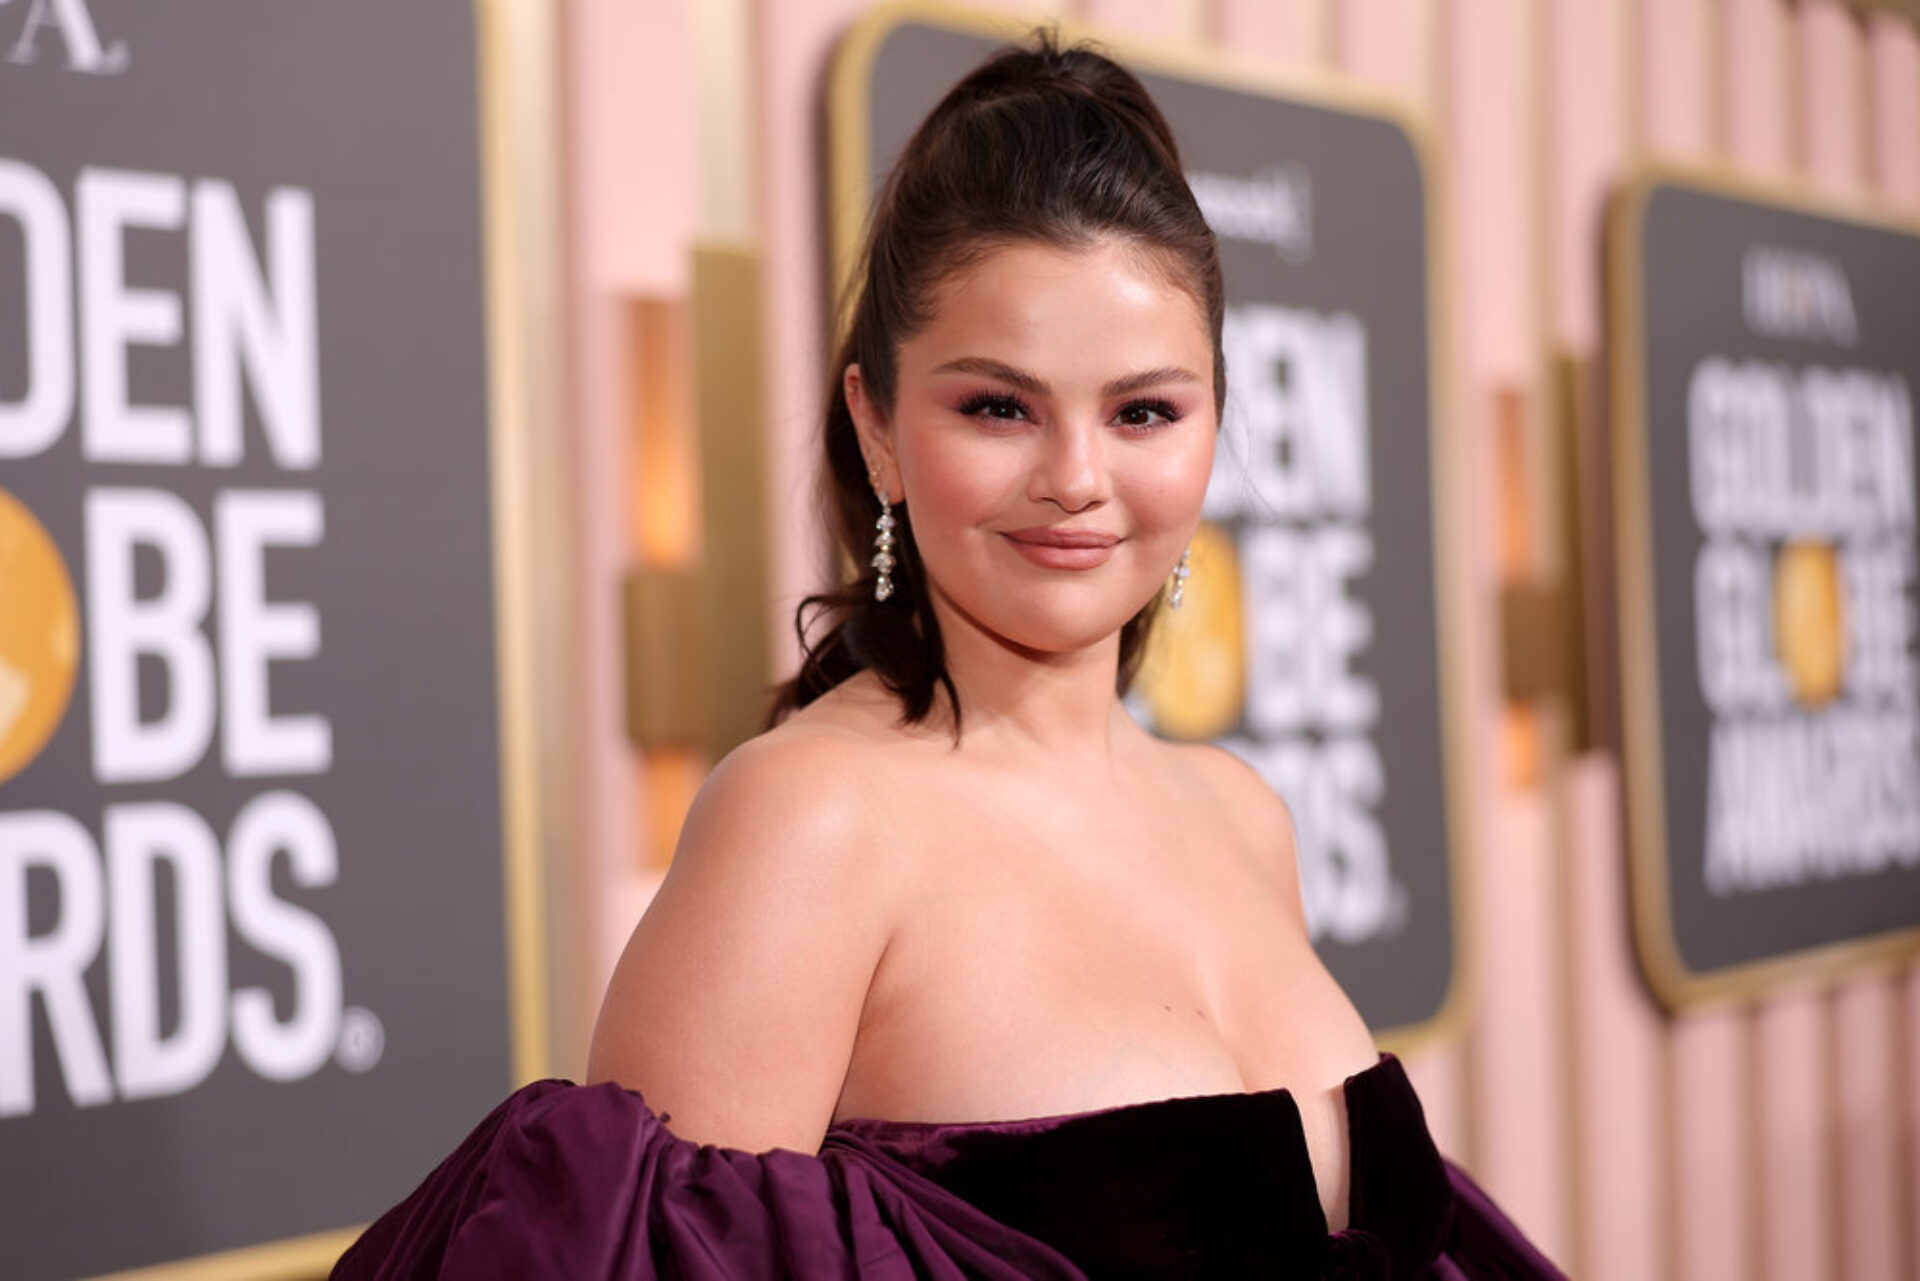 At the iHeartRadio Music Awards, Selena Gomez shared some heartfelt words in a tribute video before Taylor Swift took the stage to accept the Innovator Award.